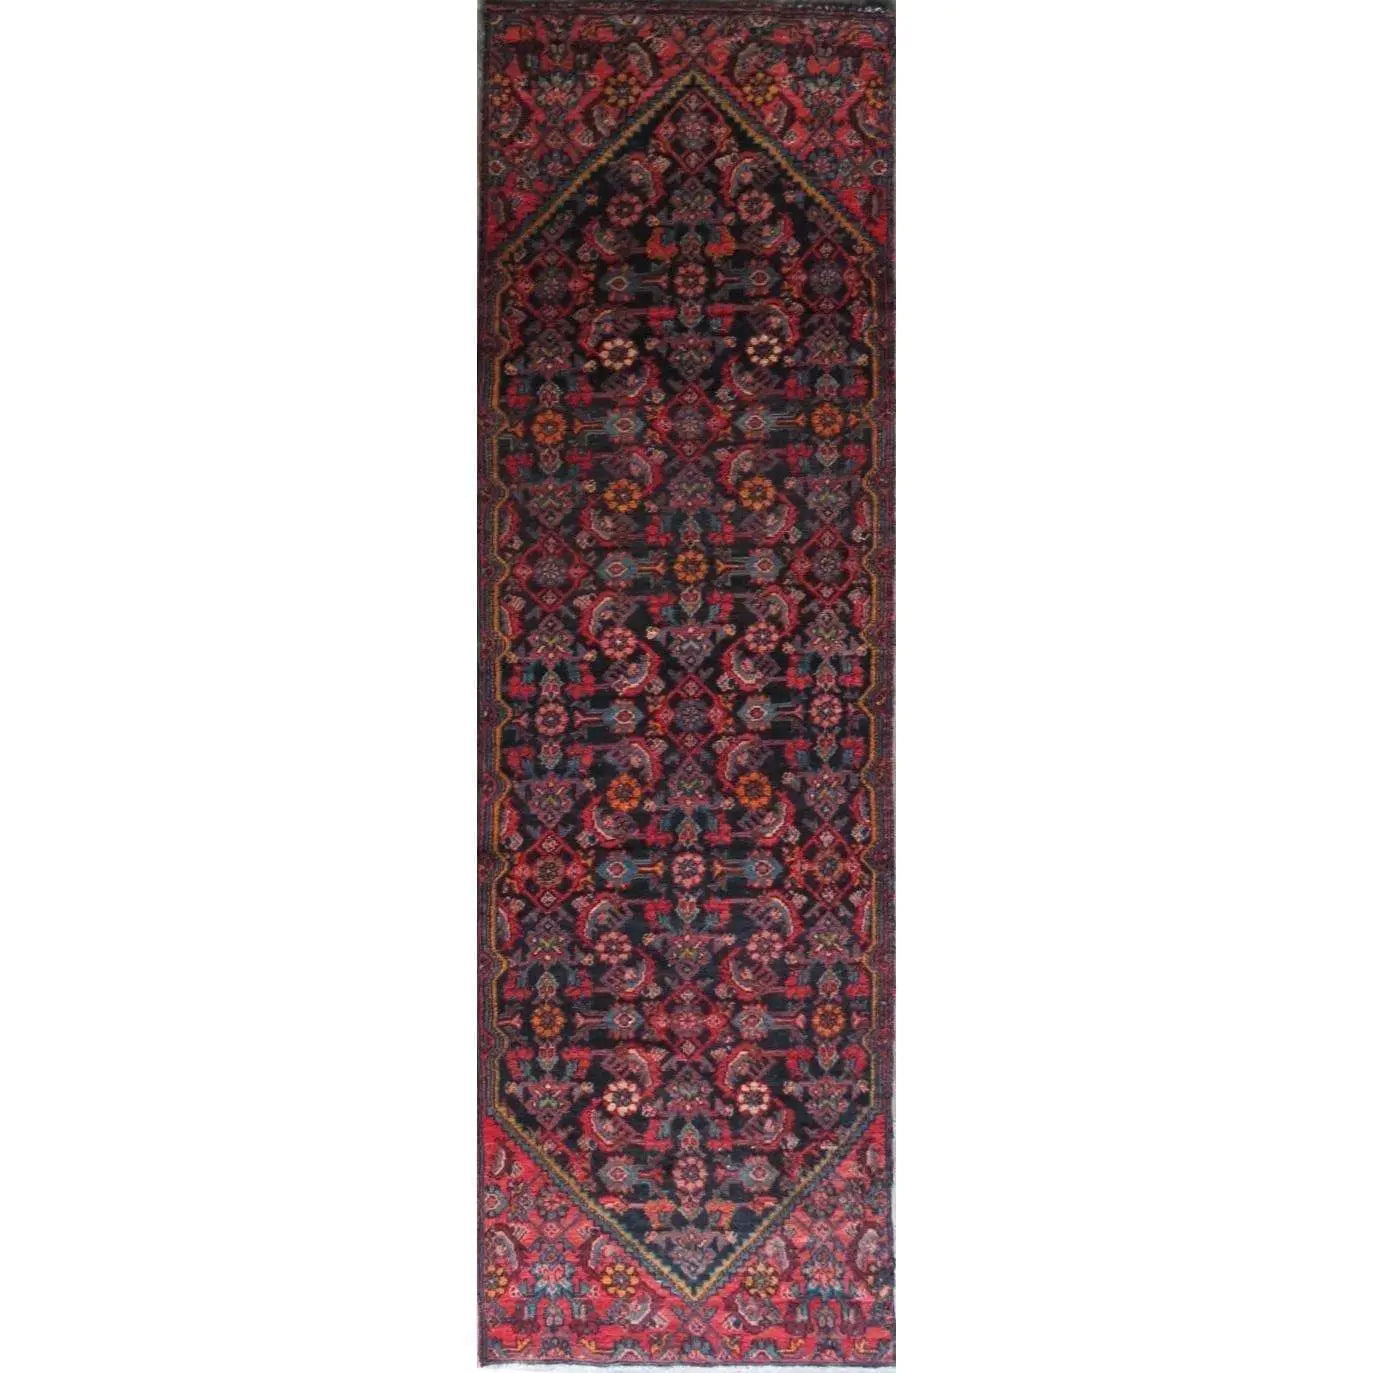 Hand-Knotted Persian Wool Rug _ Luxurious Vintage Design, 10'6" x 2'10", Artisan Crafted